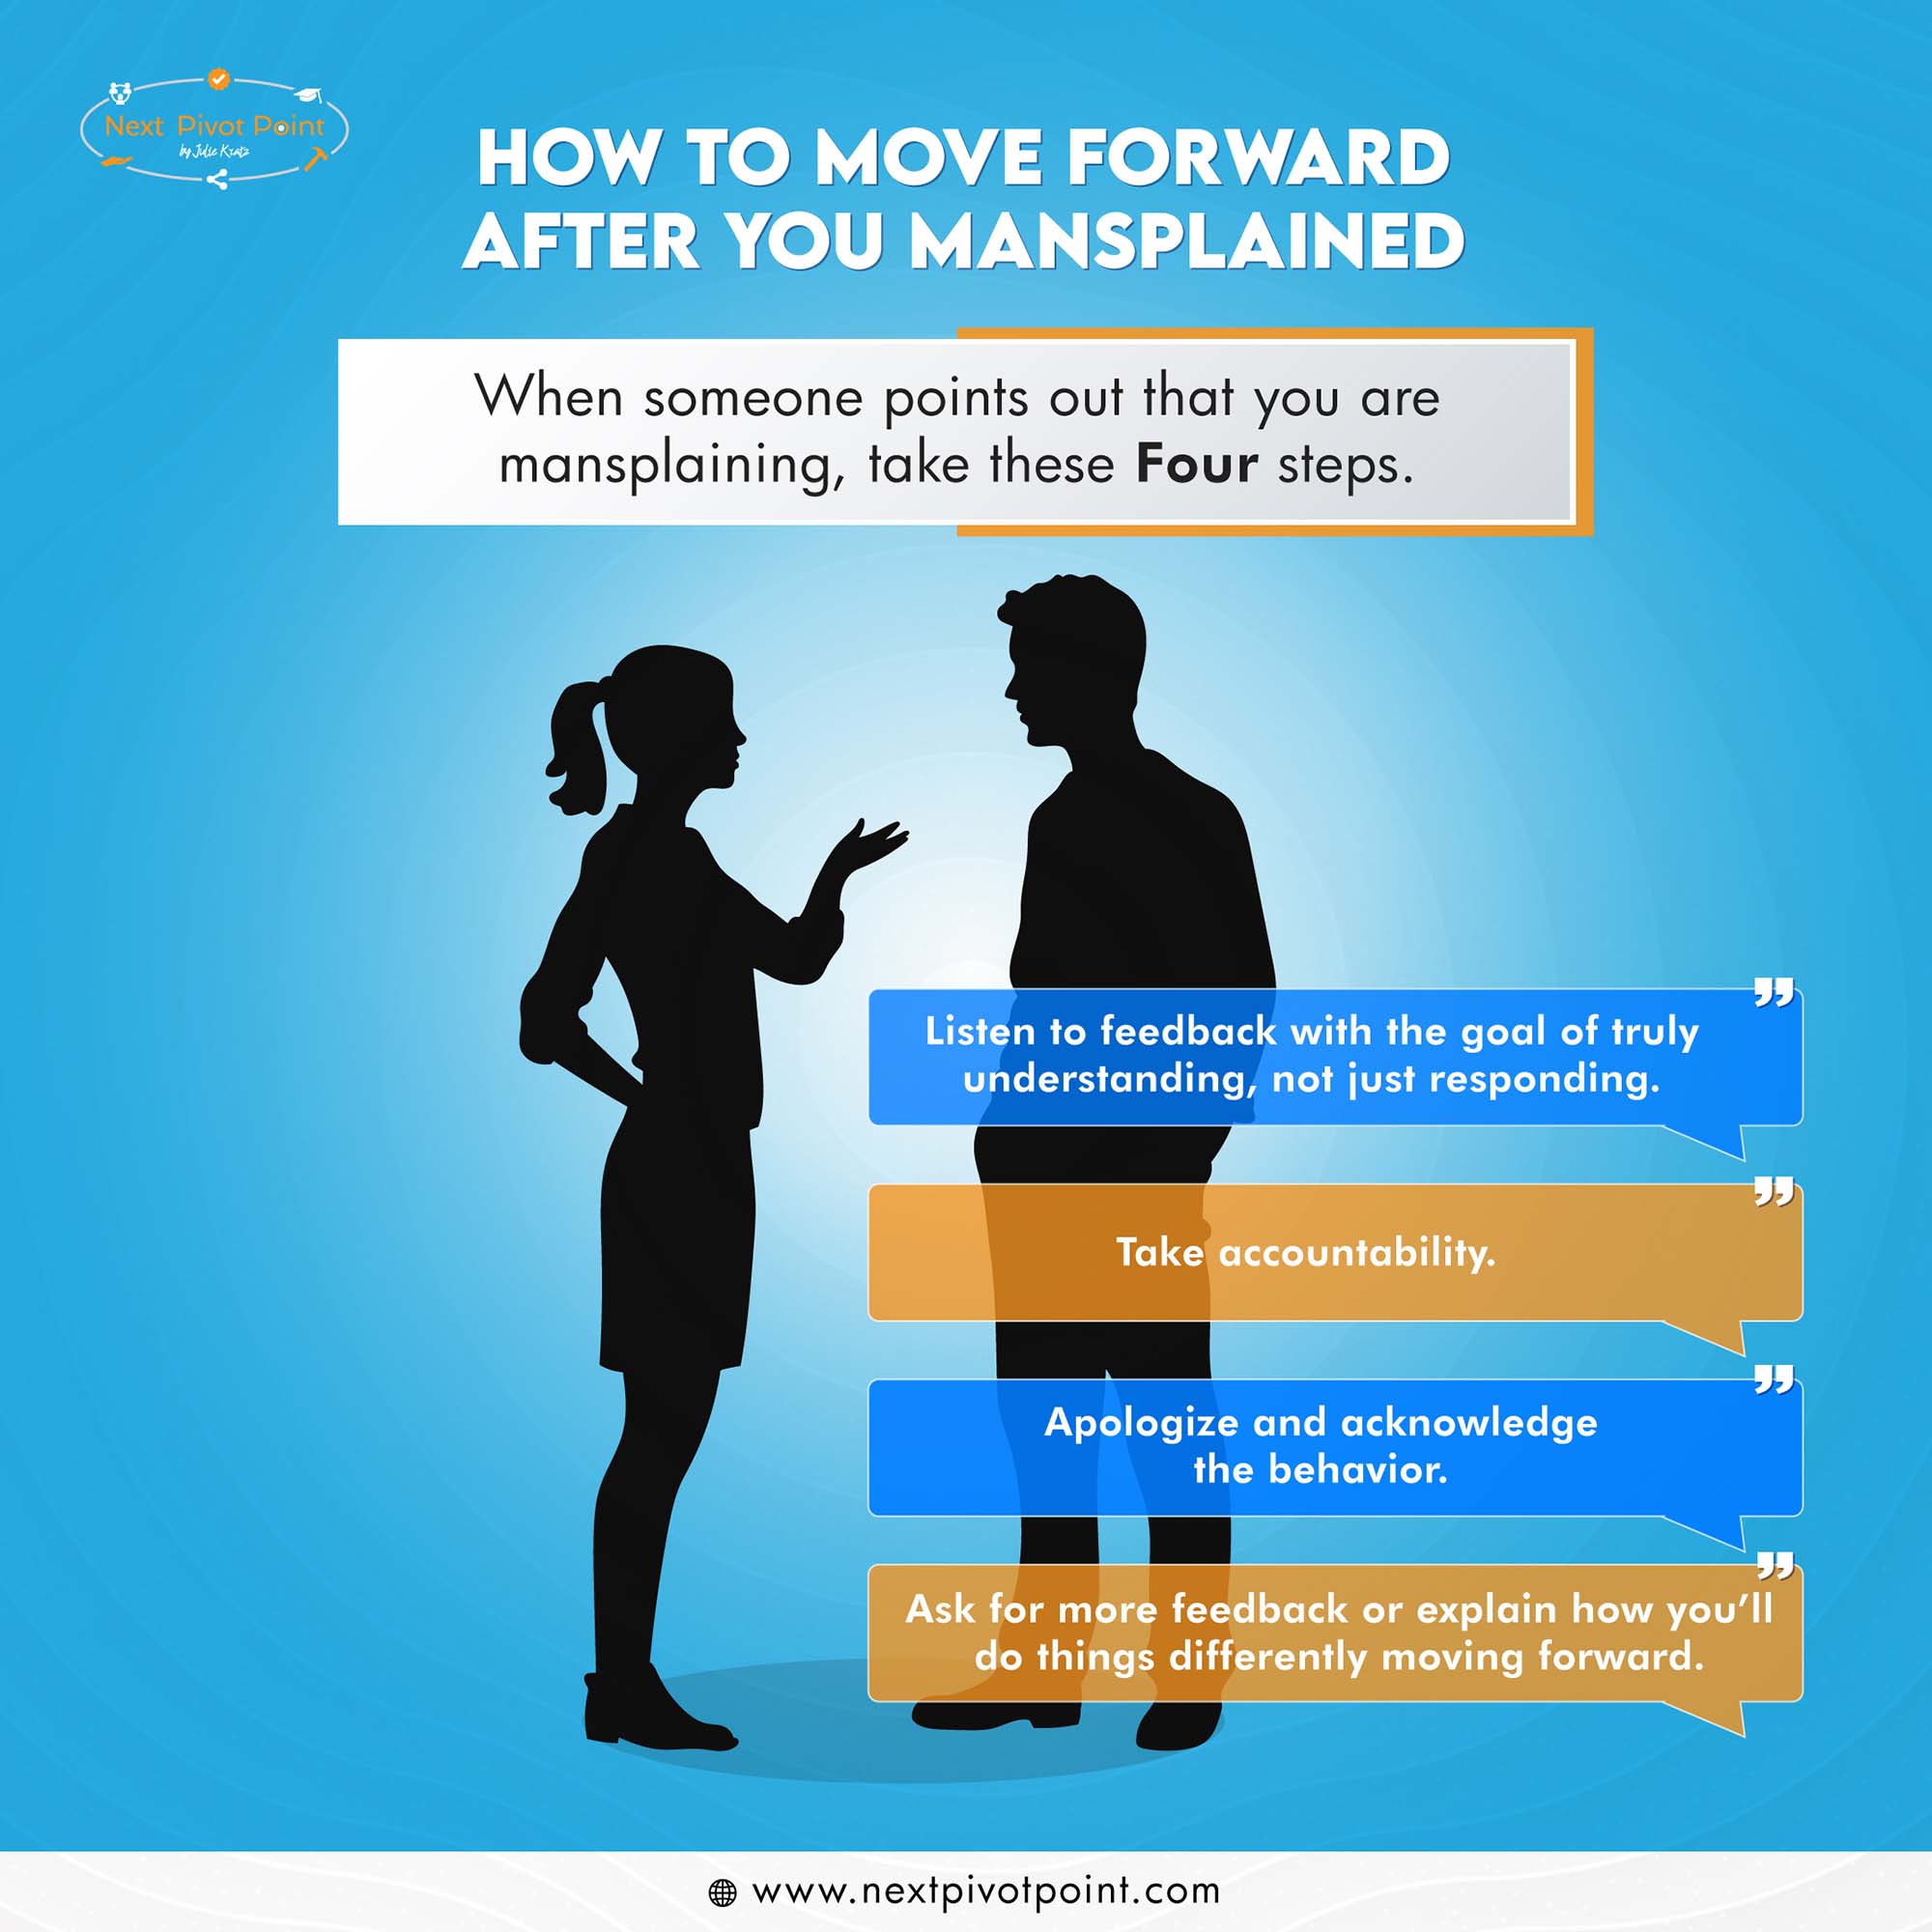 graphic showing how to move forward if you have mansplained someone. The graphic is of a man and a woman silhouette, and overlaid on the man shows 4 steps he can take to apologize and move past the fact that he mansplained